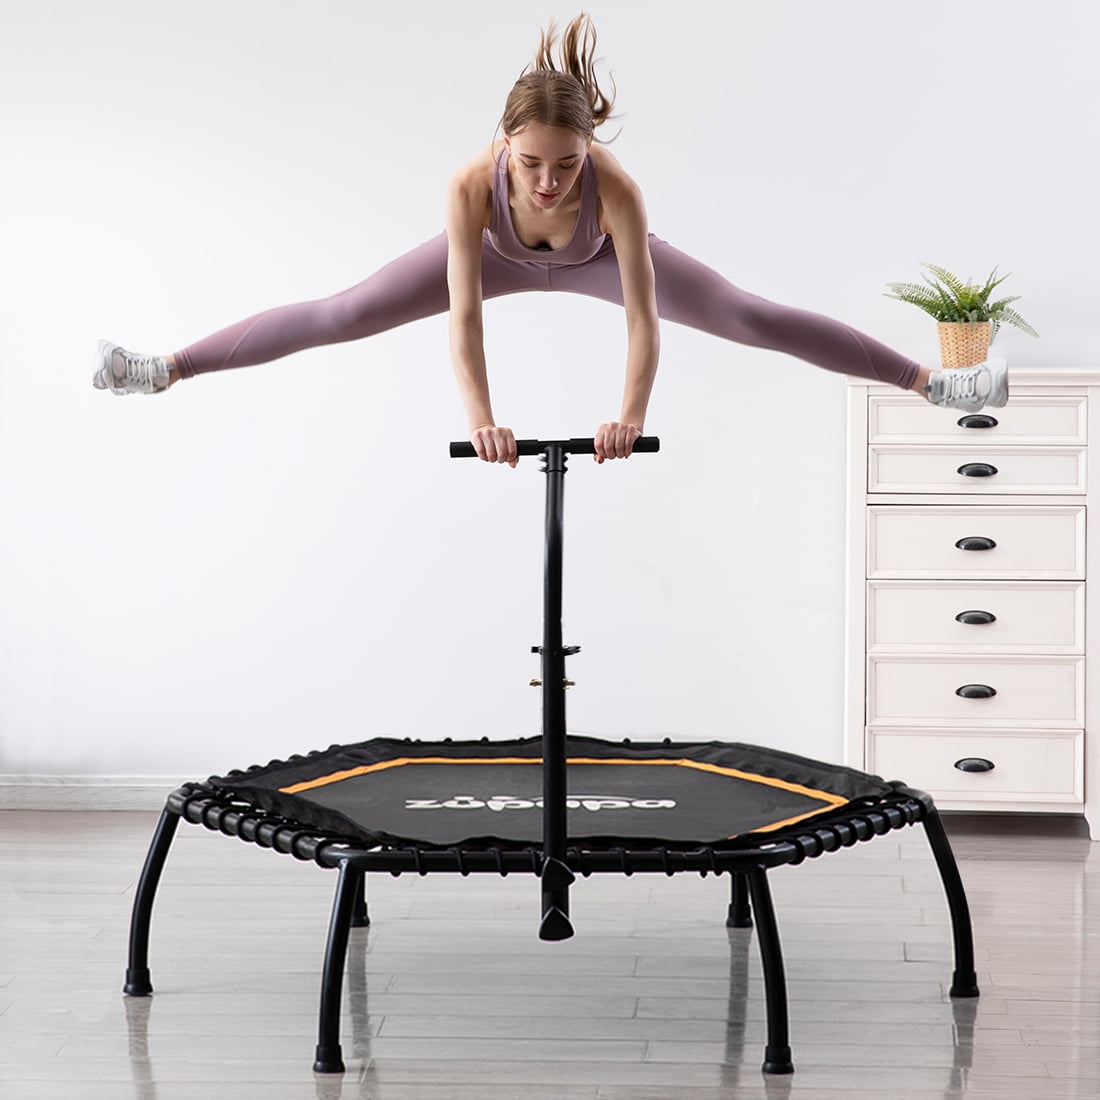 knus Objector Staple Zupapa 45 in Rebounder, Fitness Trampoline with Adjustable Handle, Max  Limit 330 lbs - Walmart.com